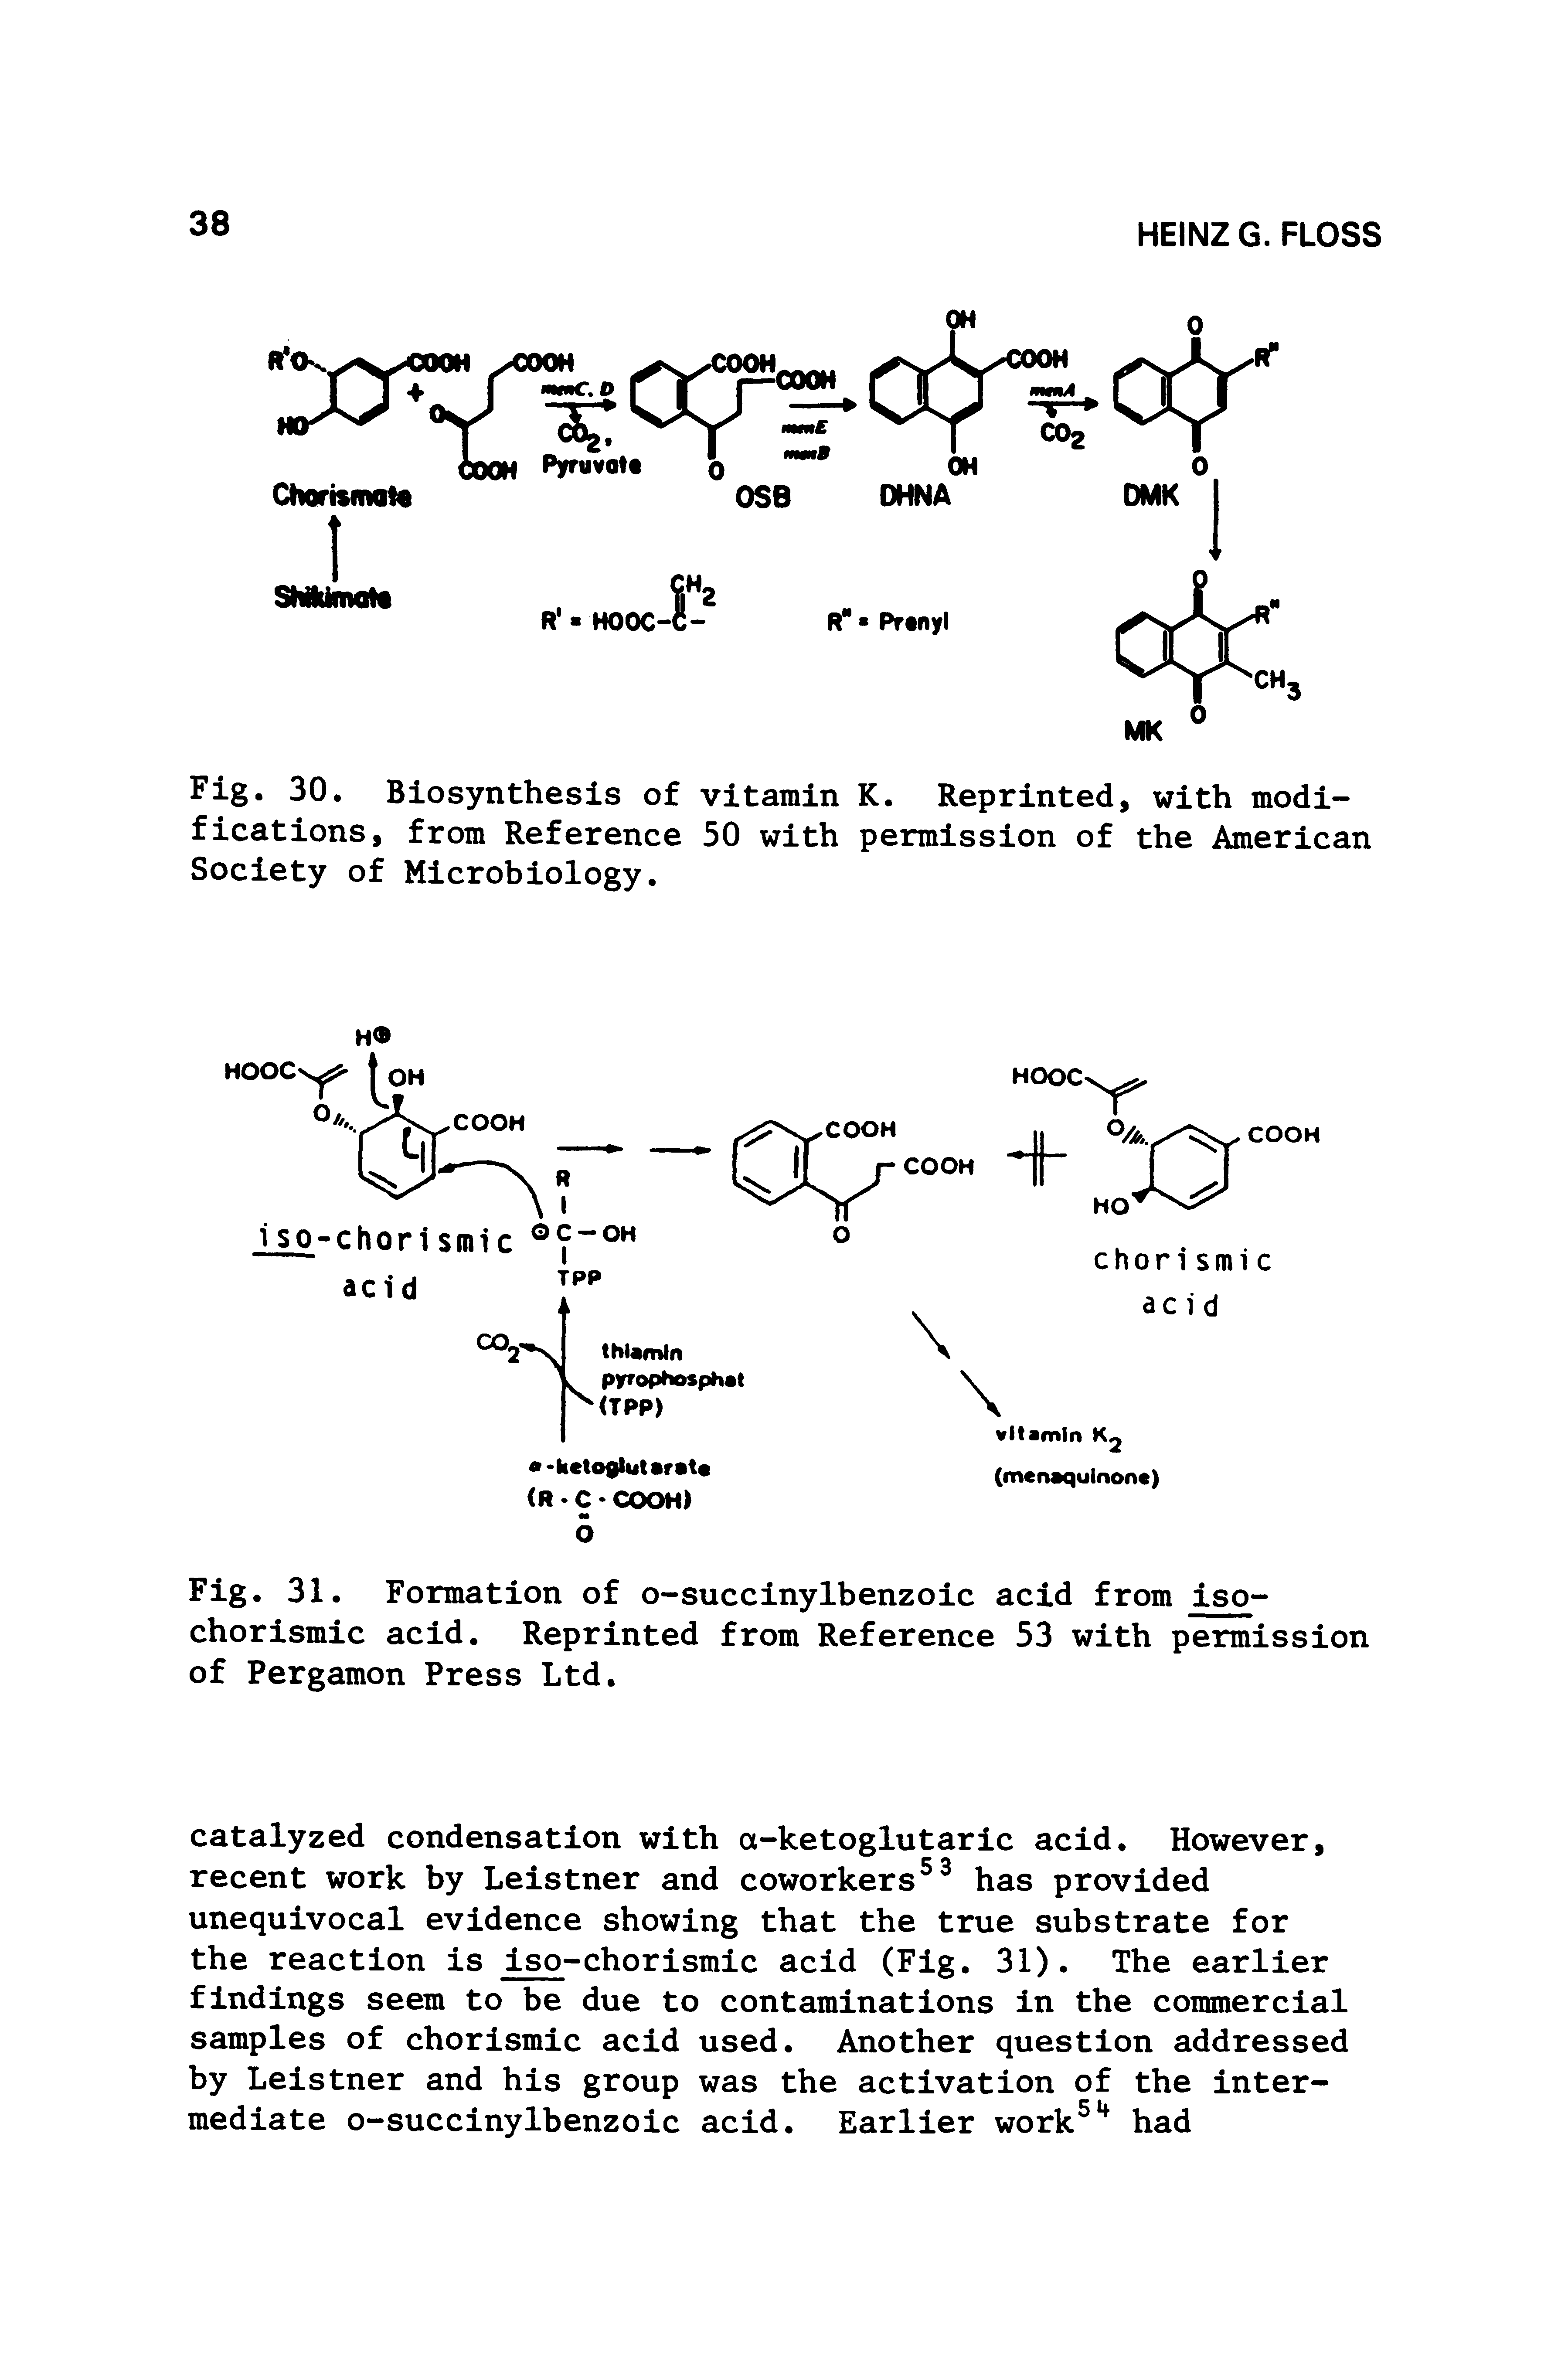 Fig. 31. Formation of o-succinylbenzoic acid from iso-chorismic acid. Reprinted from Reference 53 with permission of Pergamon Press Ltd.